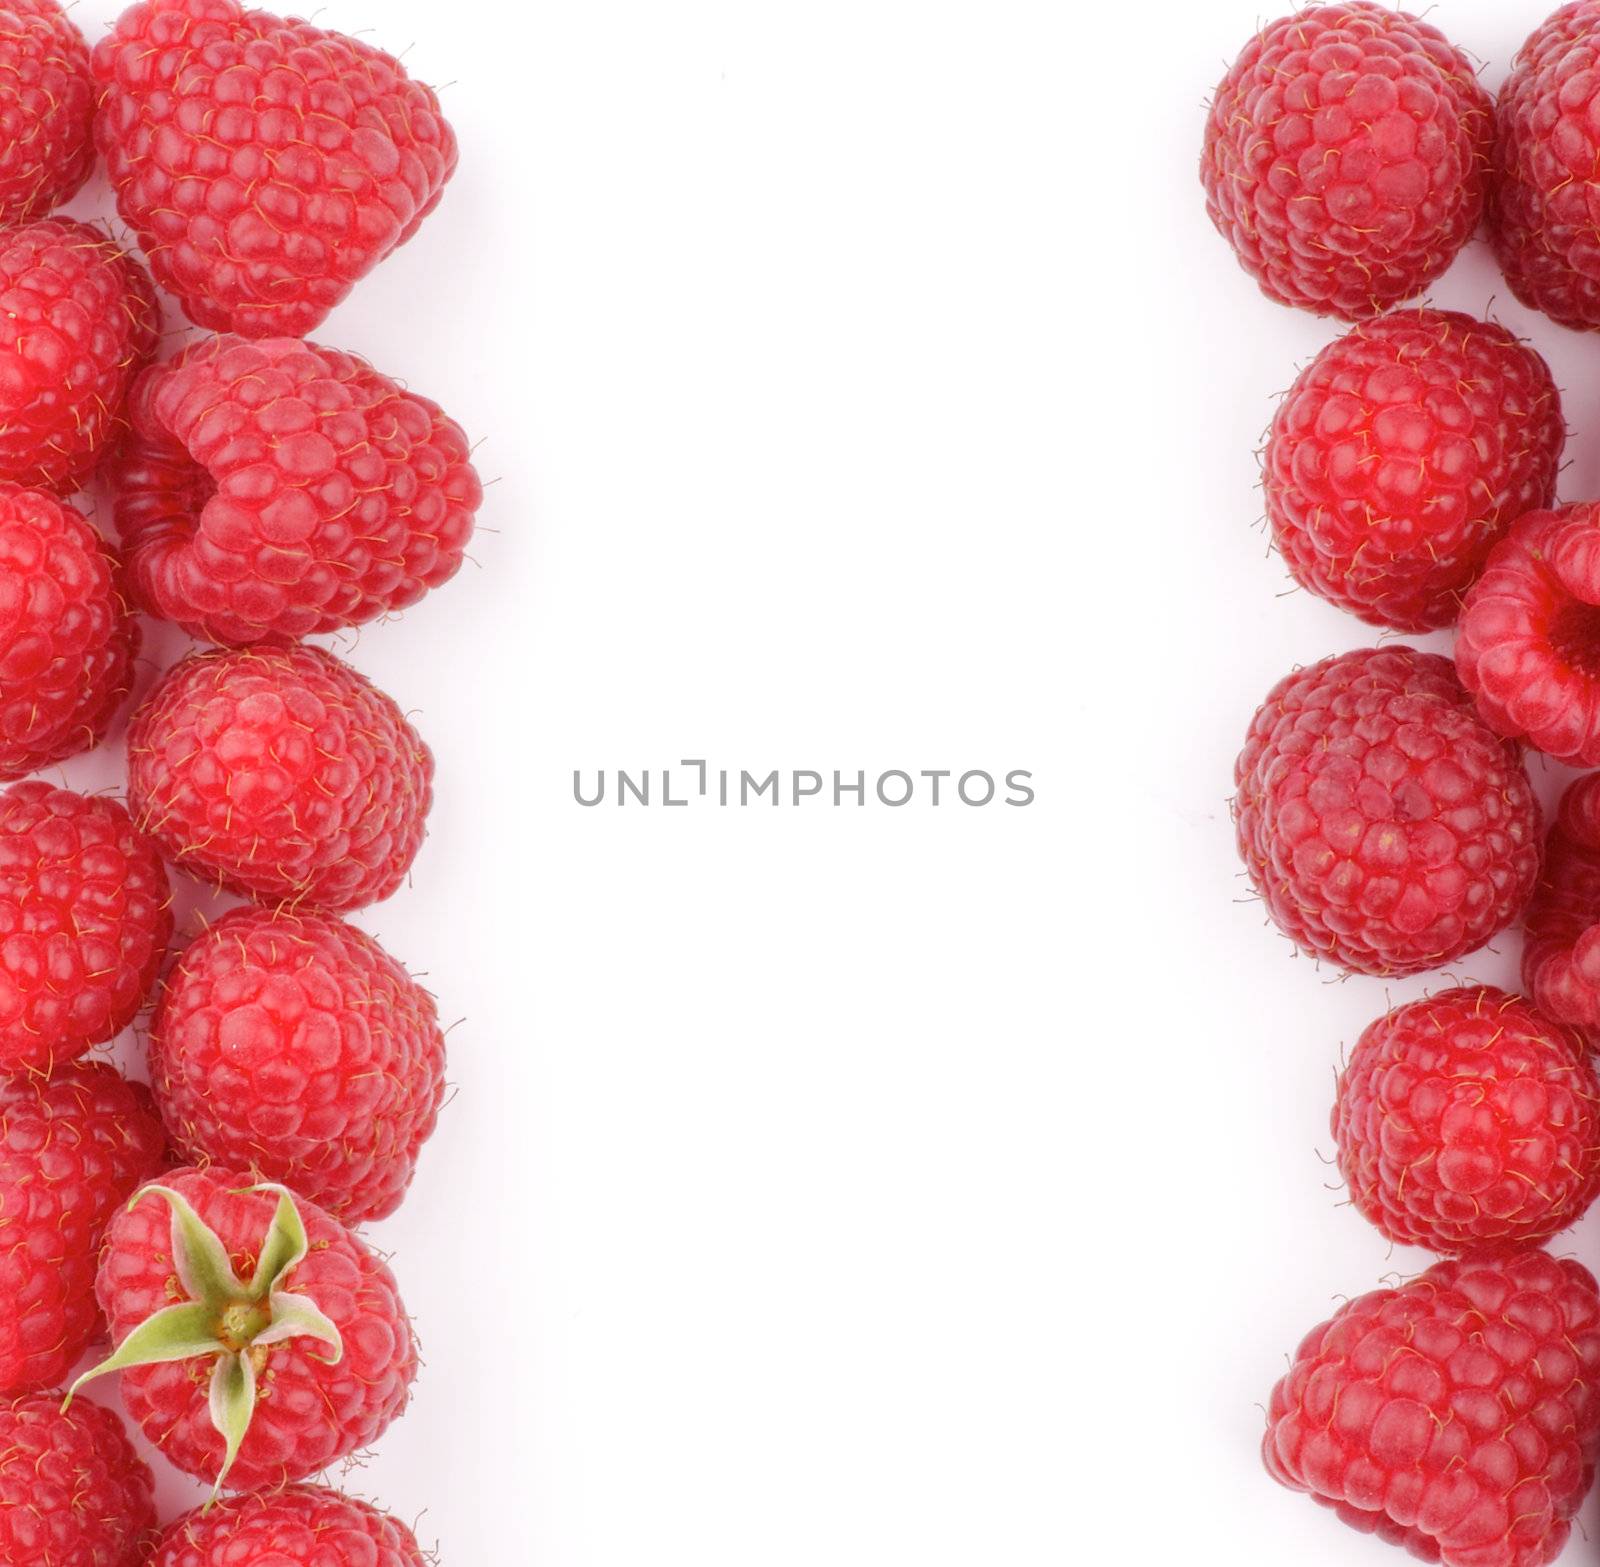 Frame of Perfect Ripe Raspberries isolated on white background